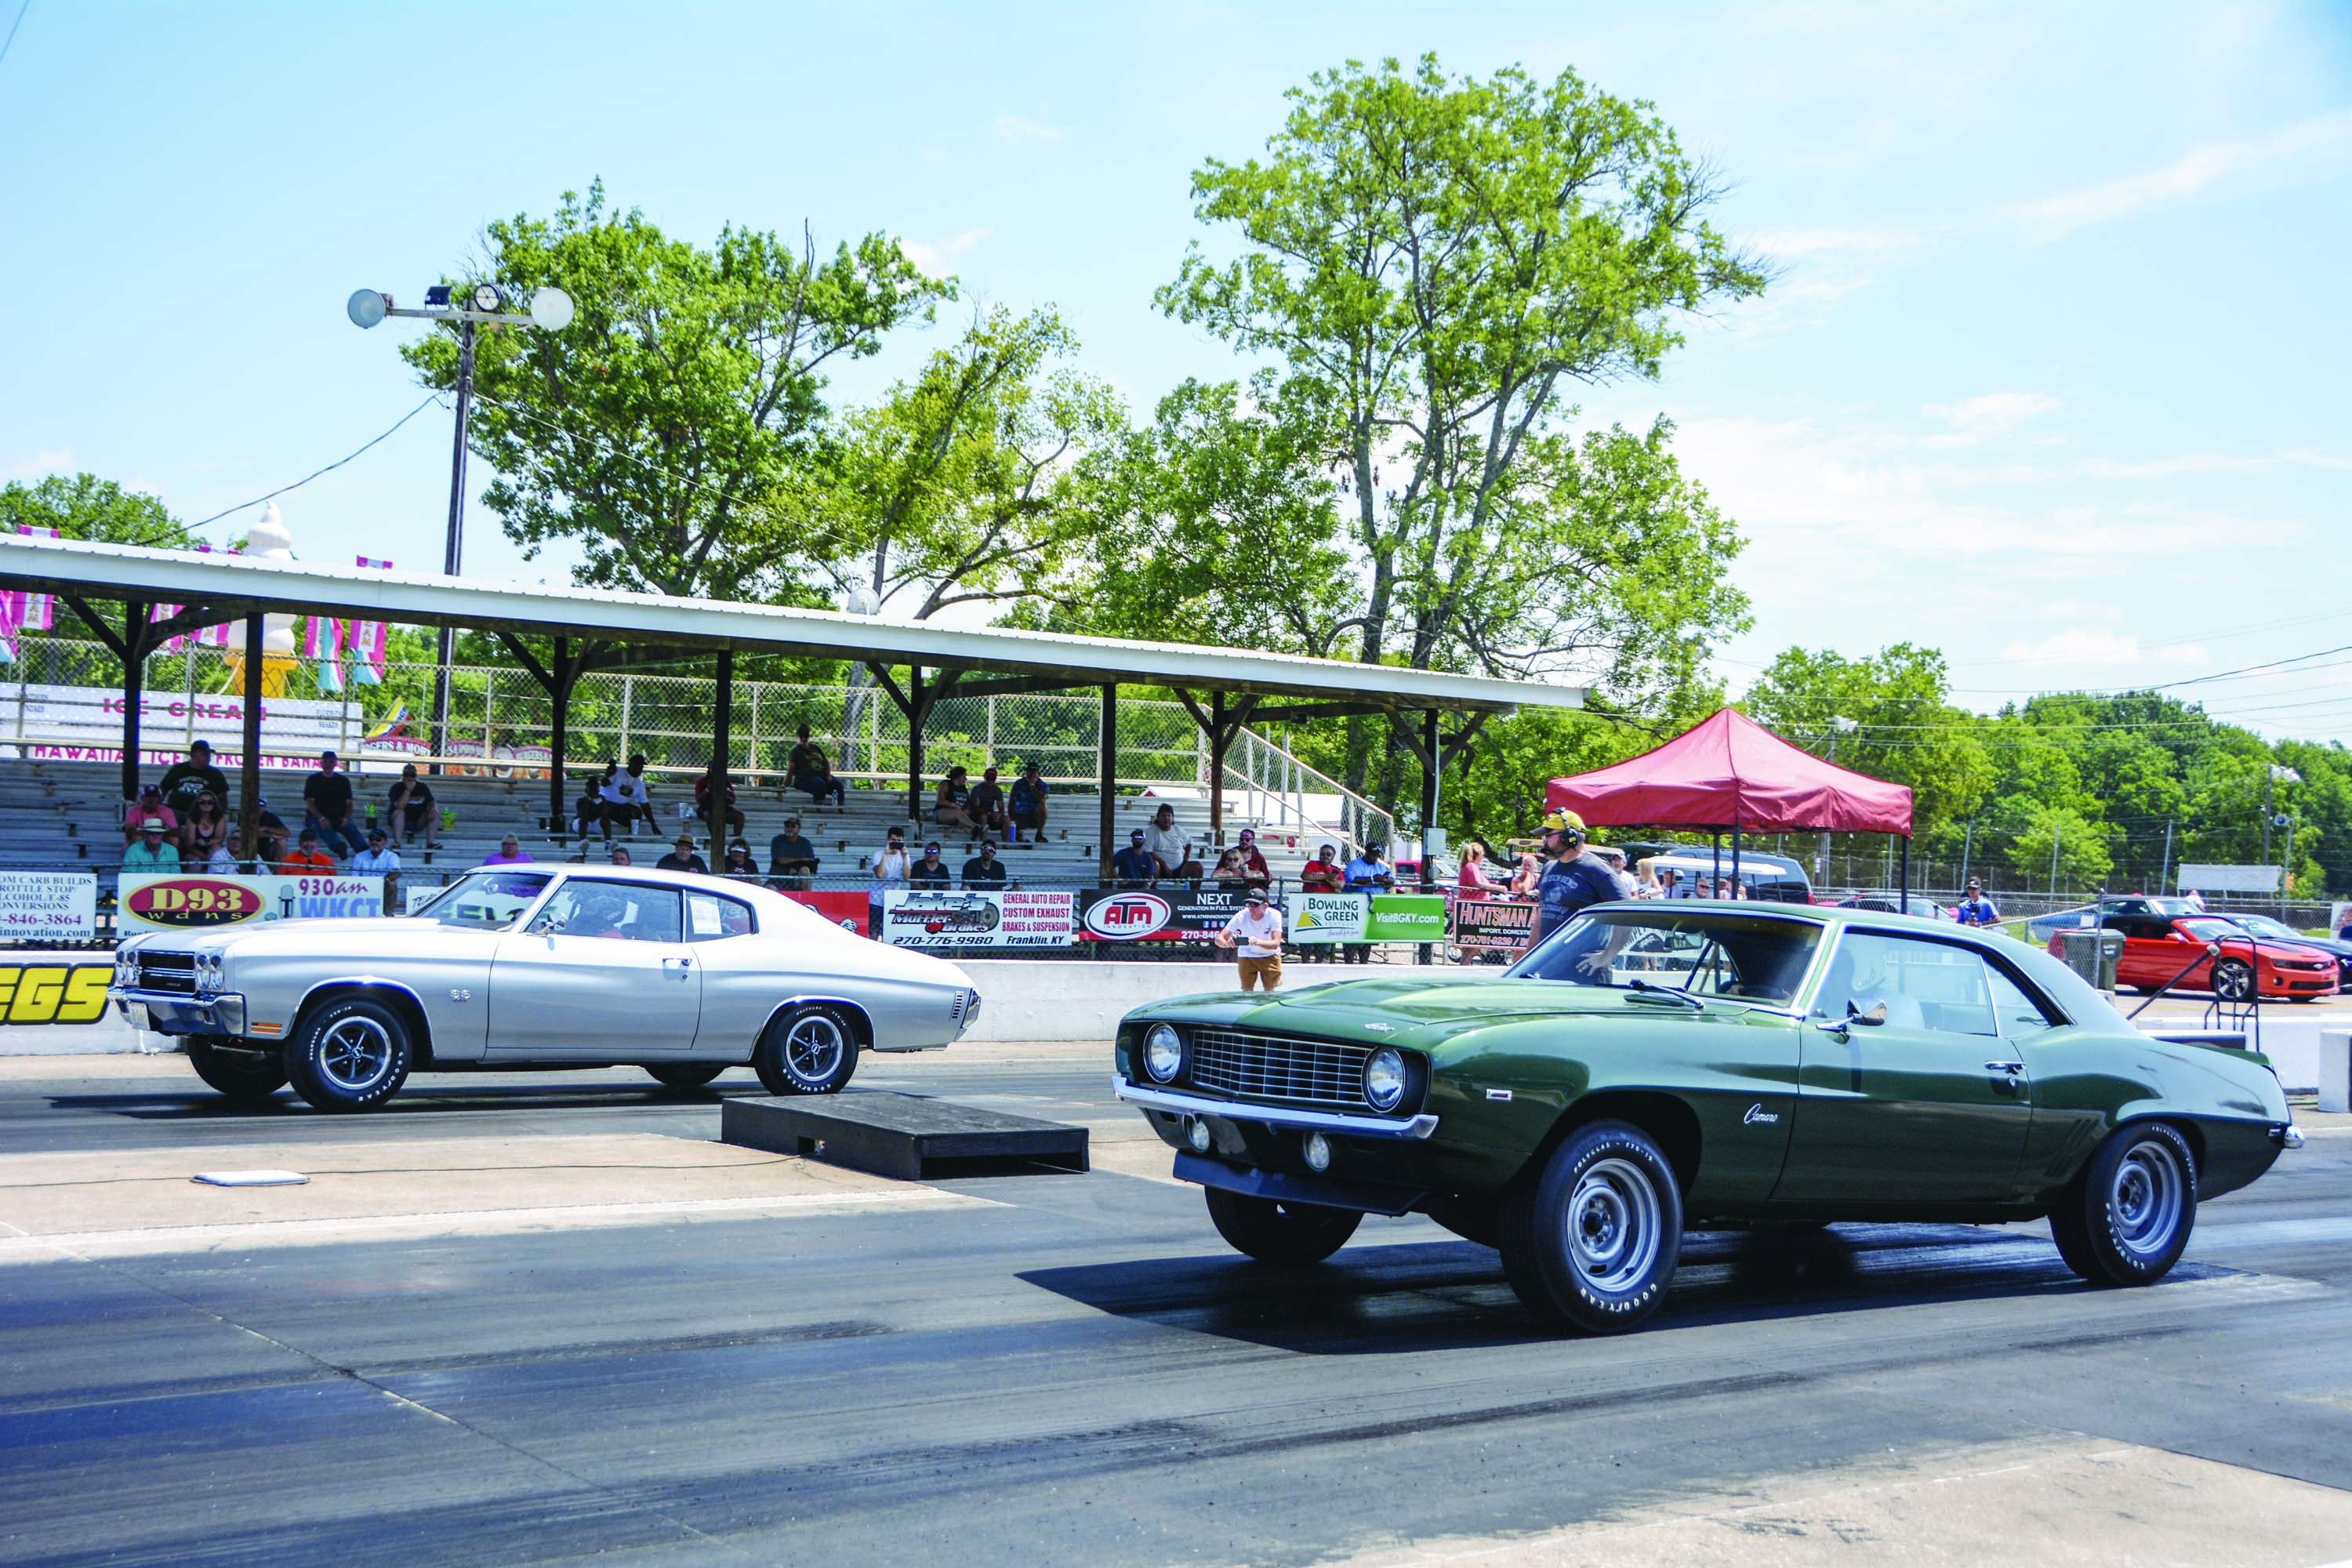 Muscle Car Royalty Rolls Into The 2023 Super Car Reunion